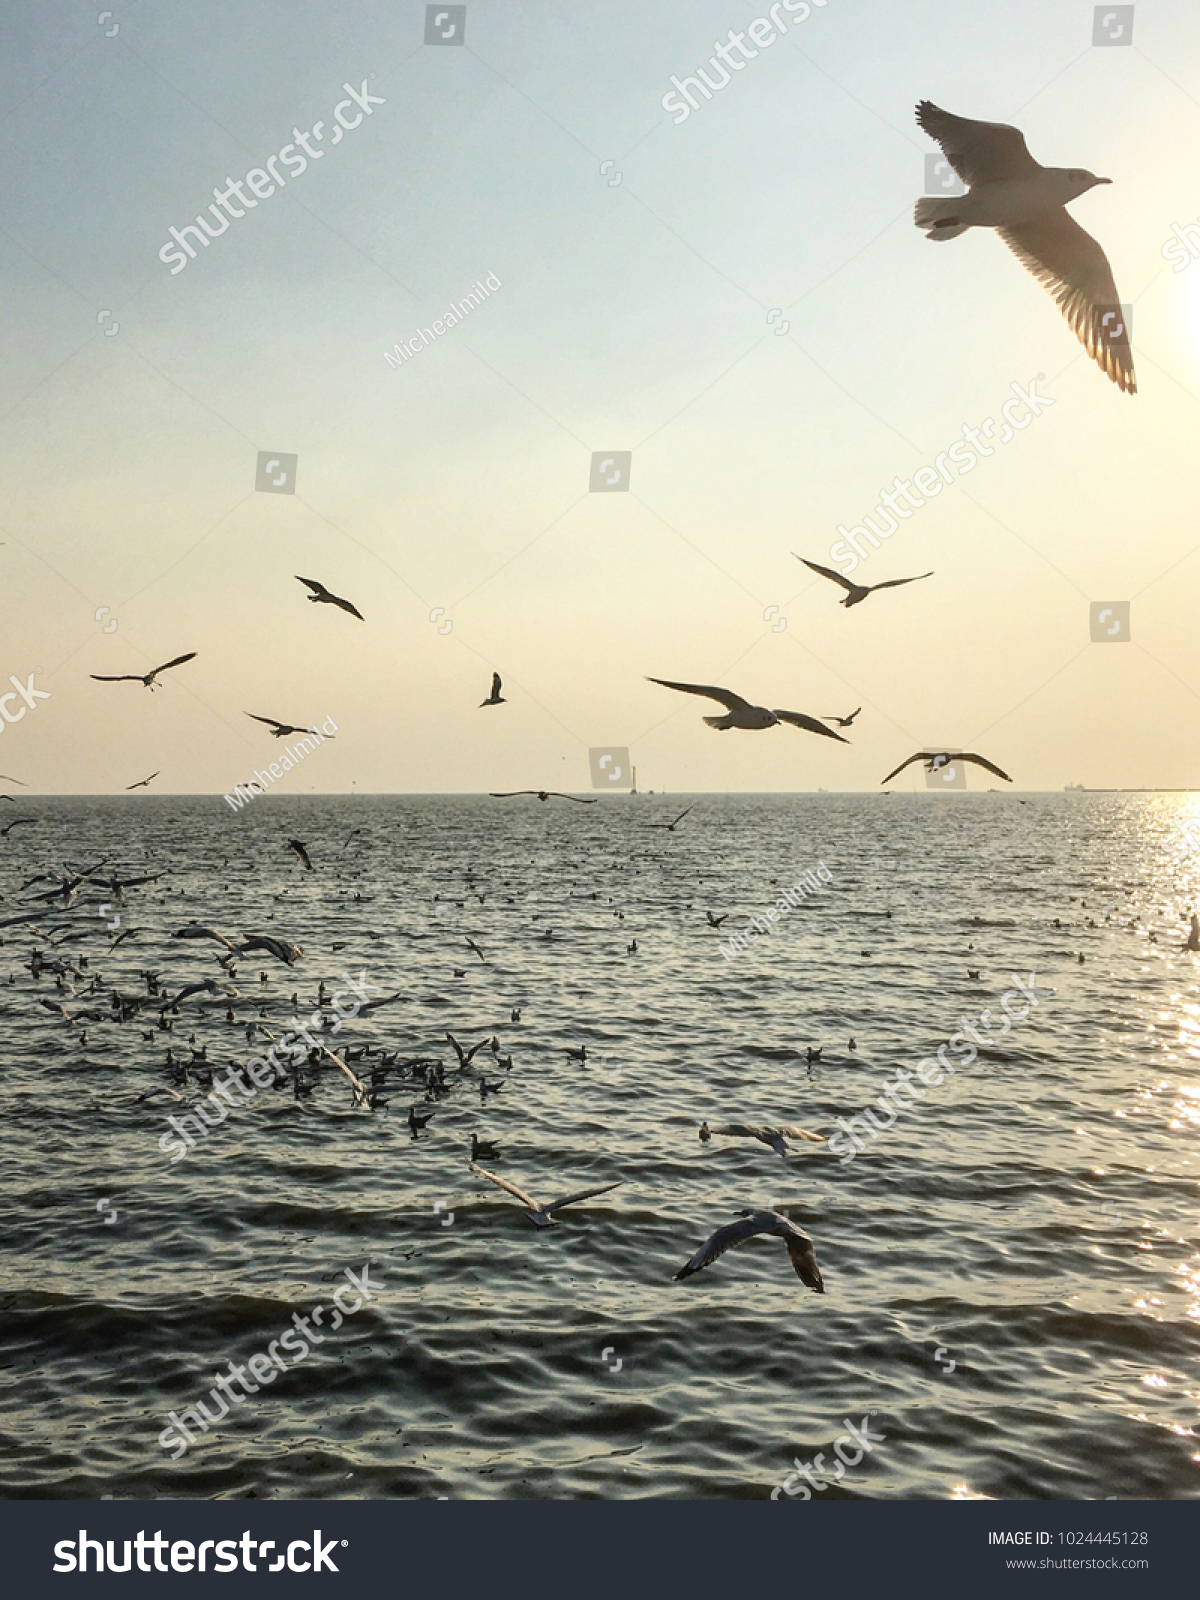 Seagulls flying above the sea #1024445128